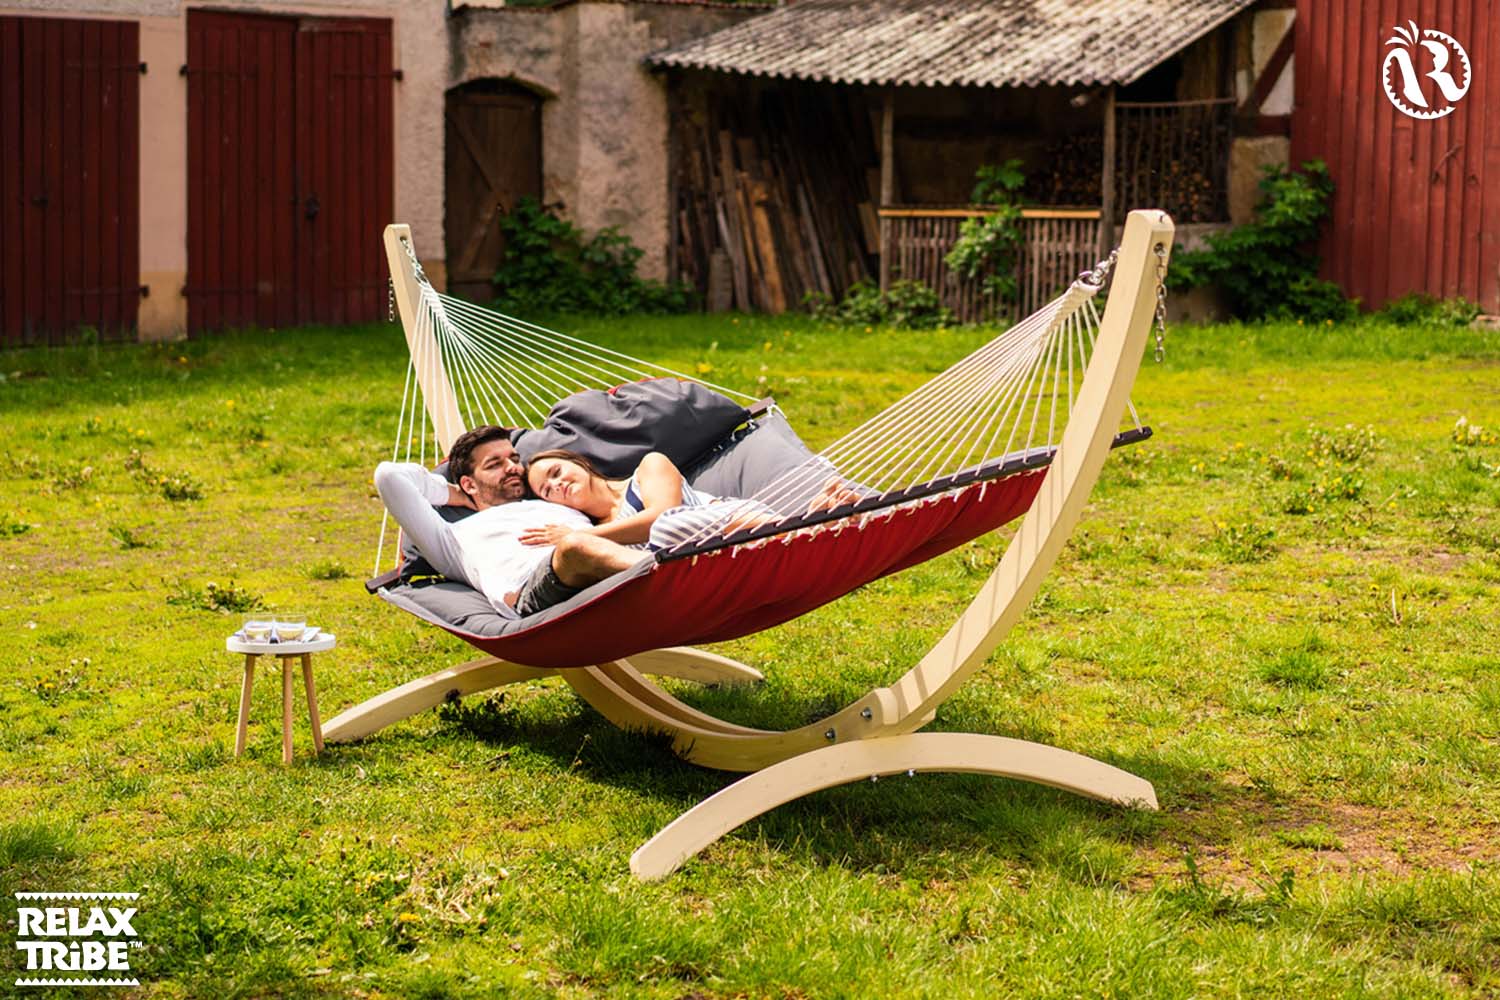 fat-hammock-red-double-xxl-weatherproof-padded-hammock-with-bars-pillow-red-dark-grey-garden-wood-stand-couple